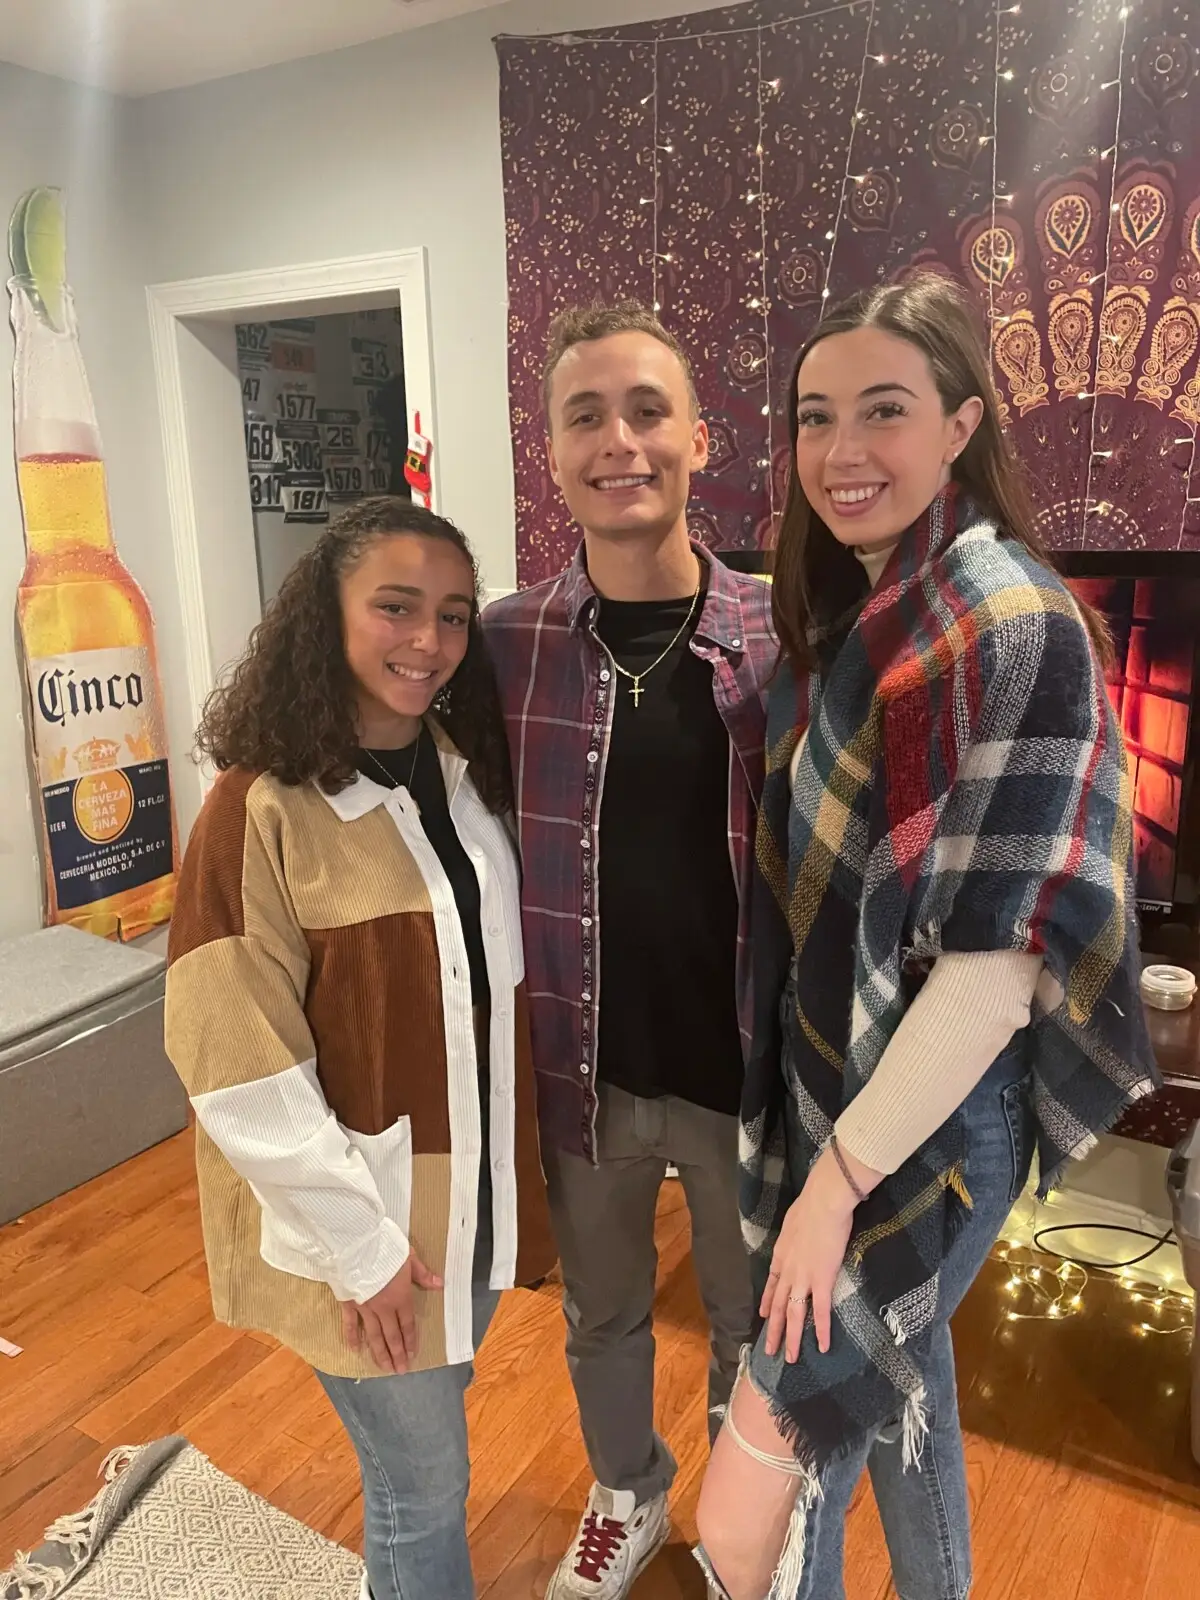 Patrick Ensmenger '23 with two friends